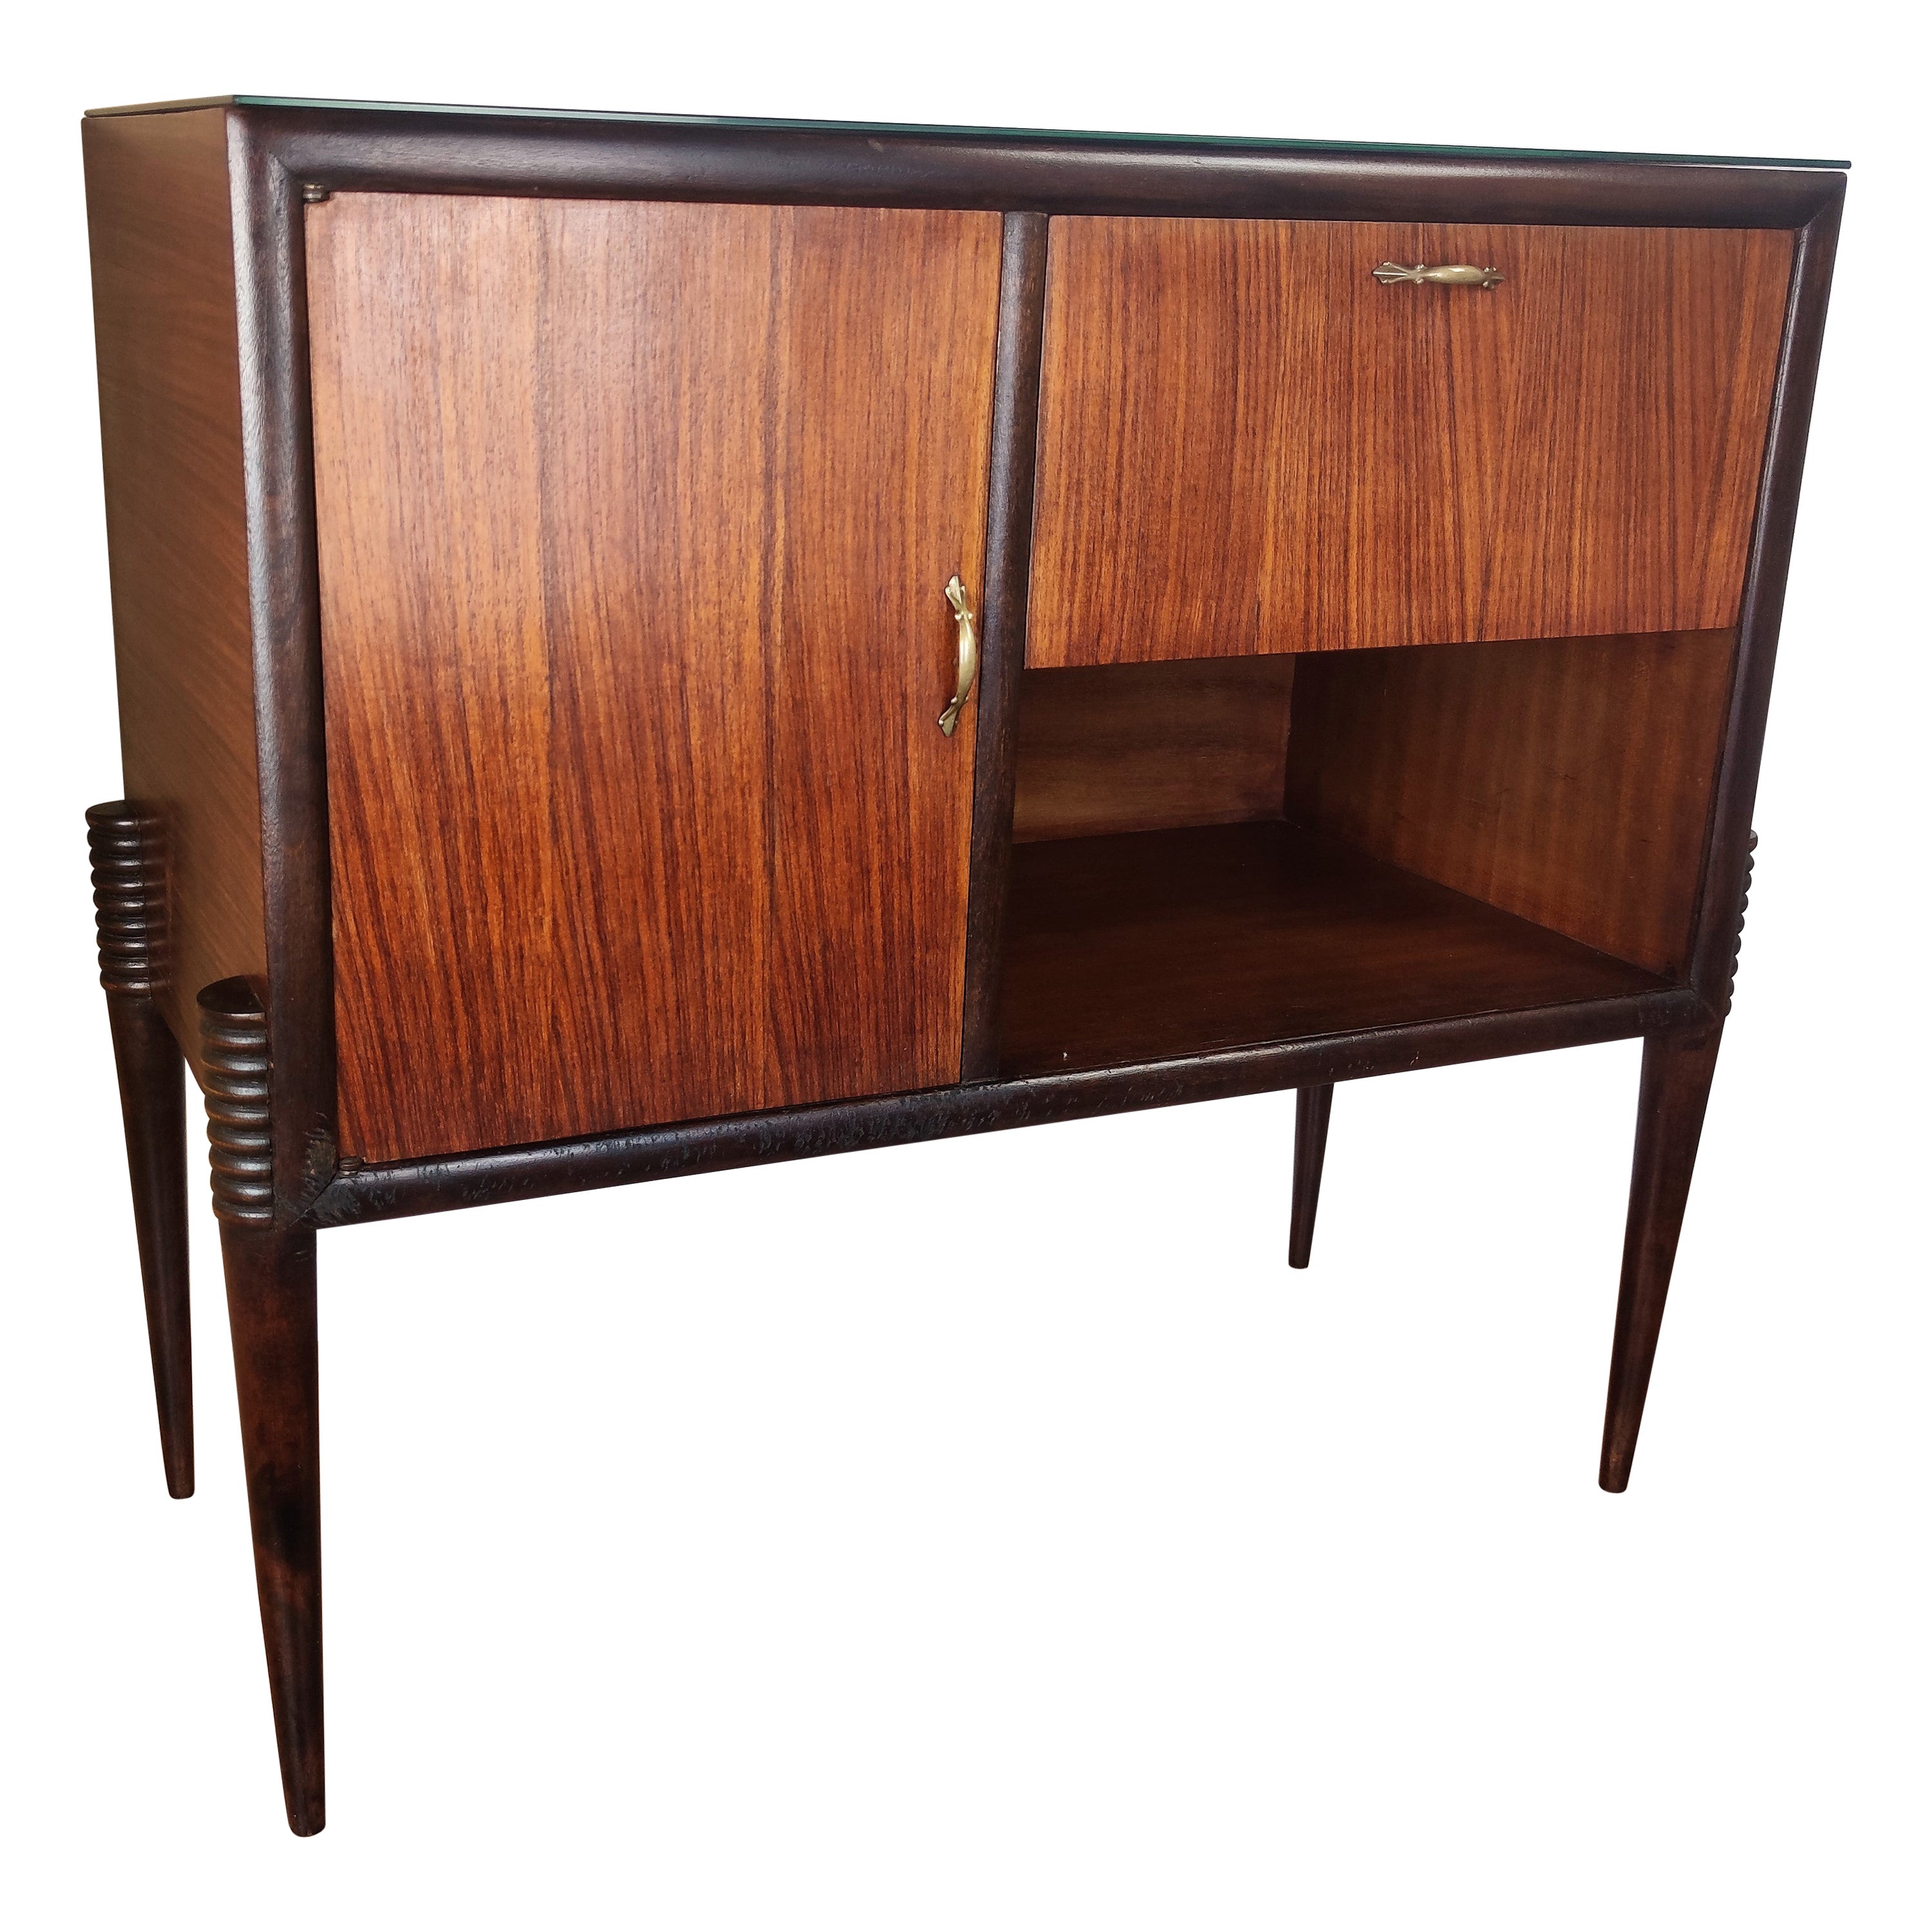 1960s Italian Mid-Century Modern Wood Brass and Glass Top Dry Bar Drinks Cabinet